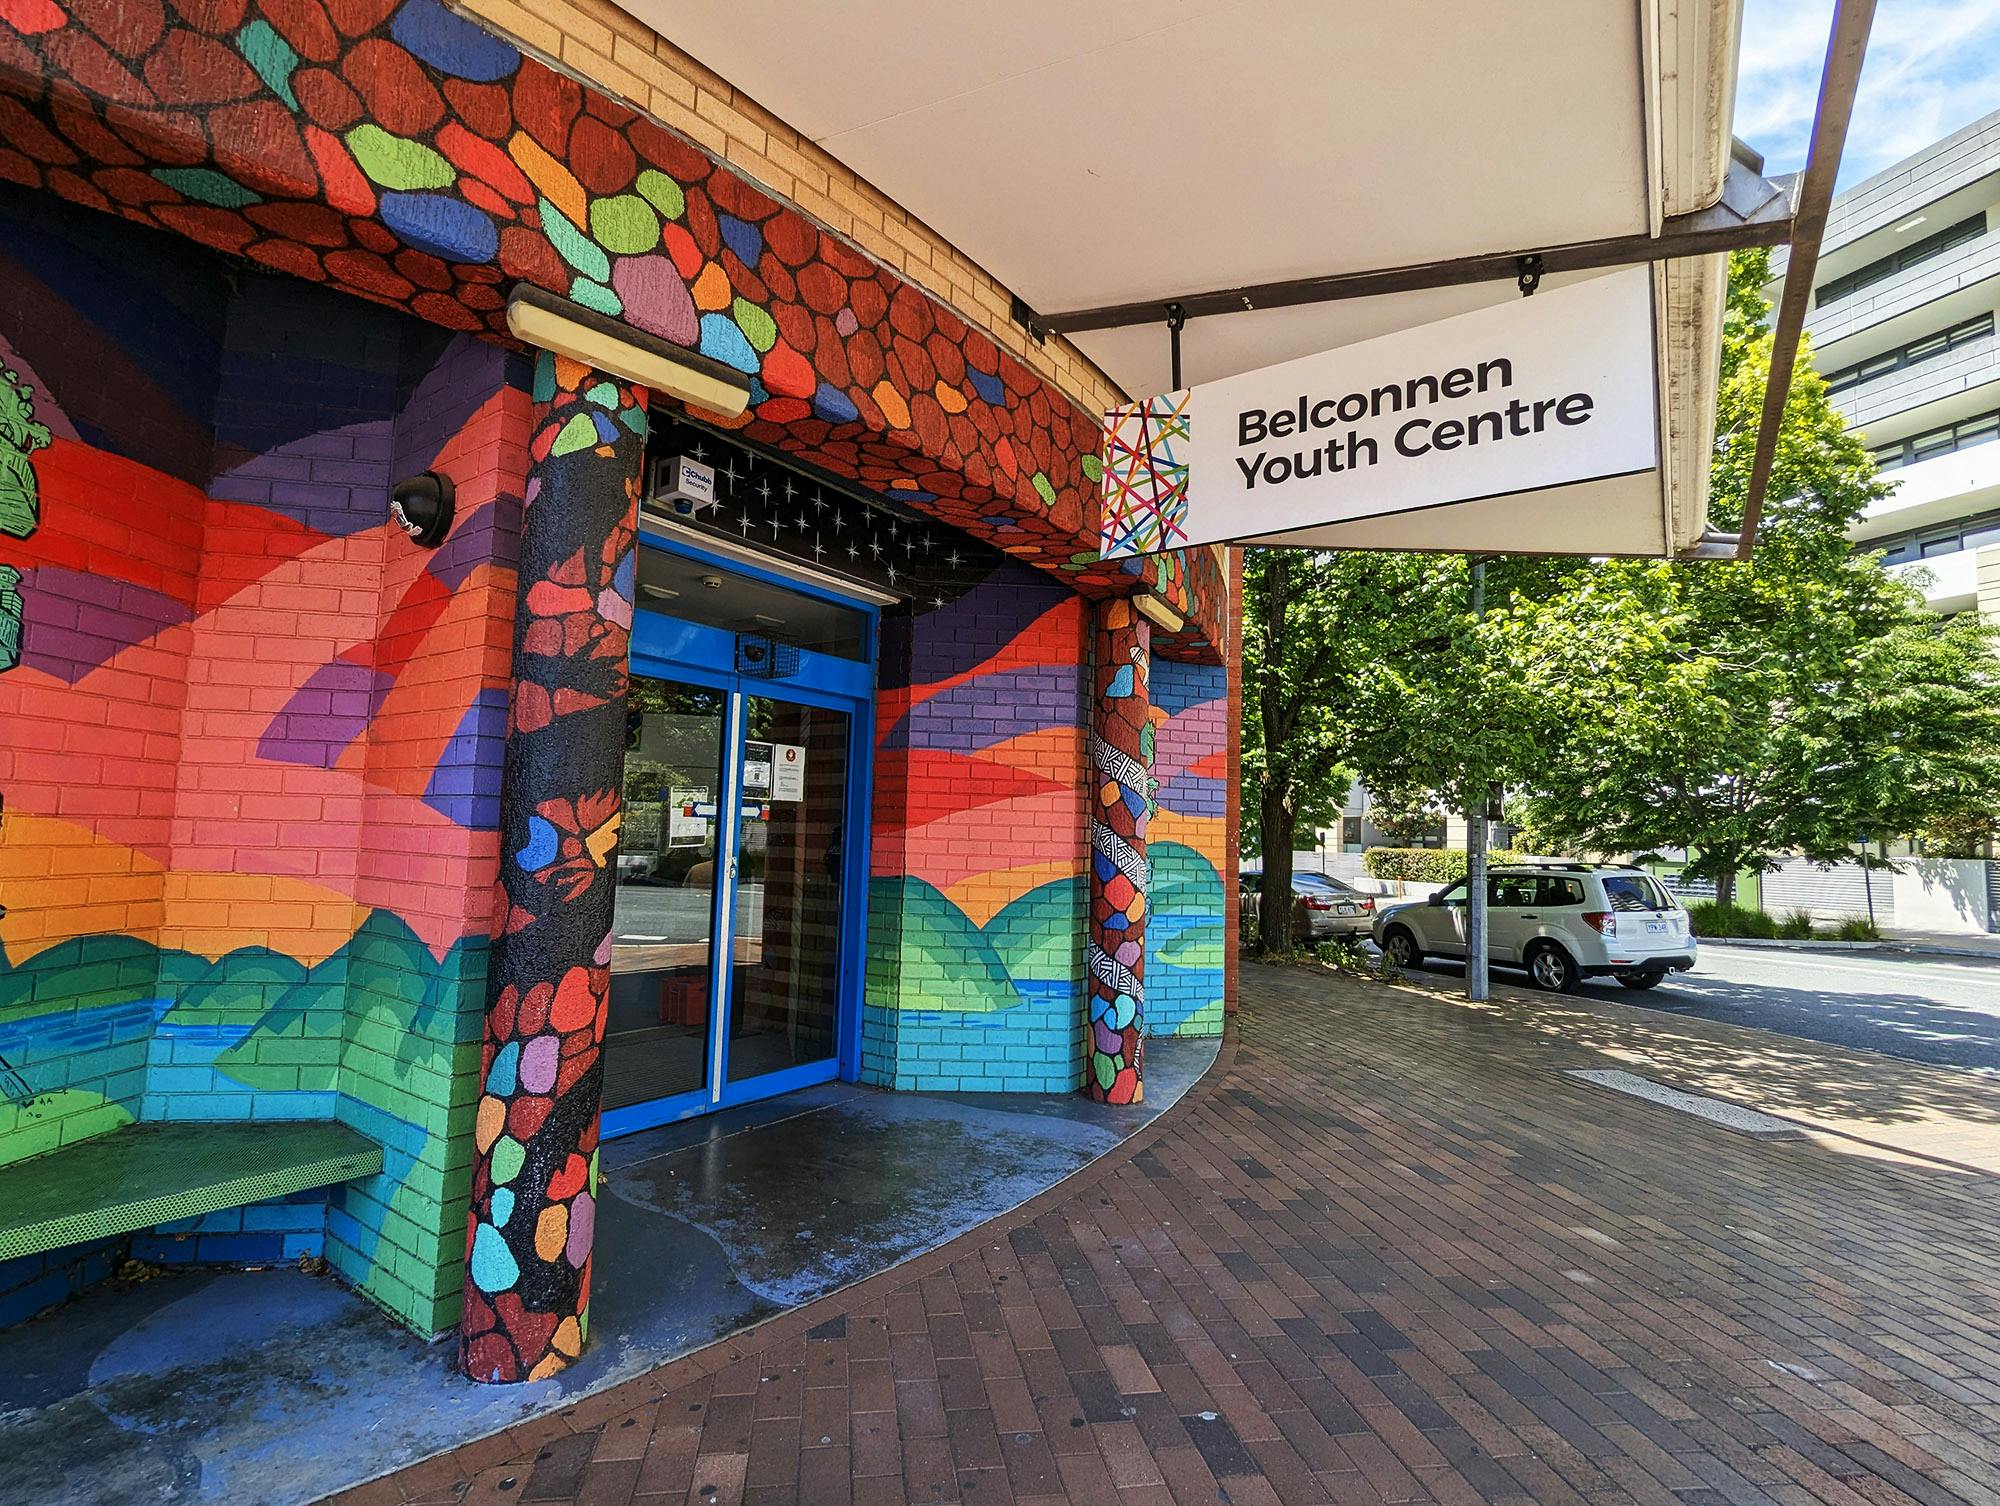 The entrance to the Belconnen Youth Centre